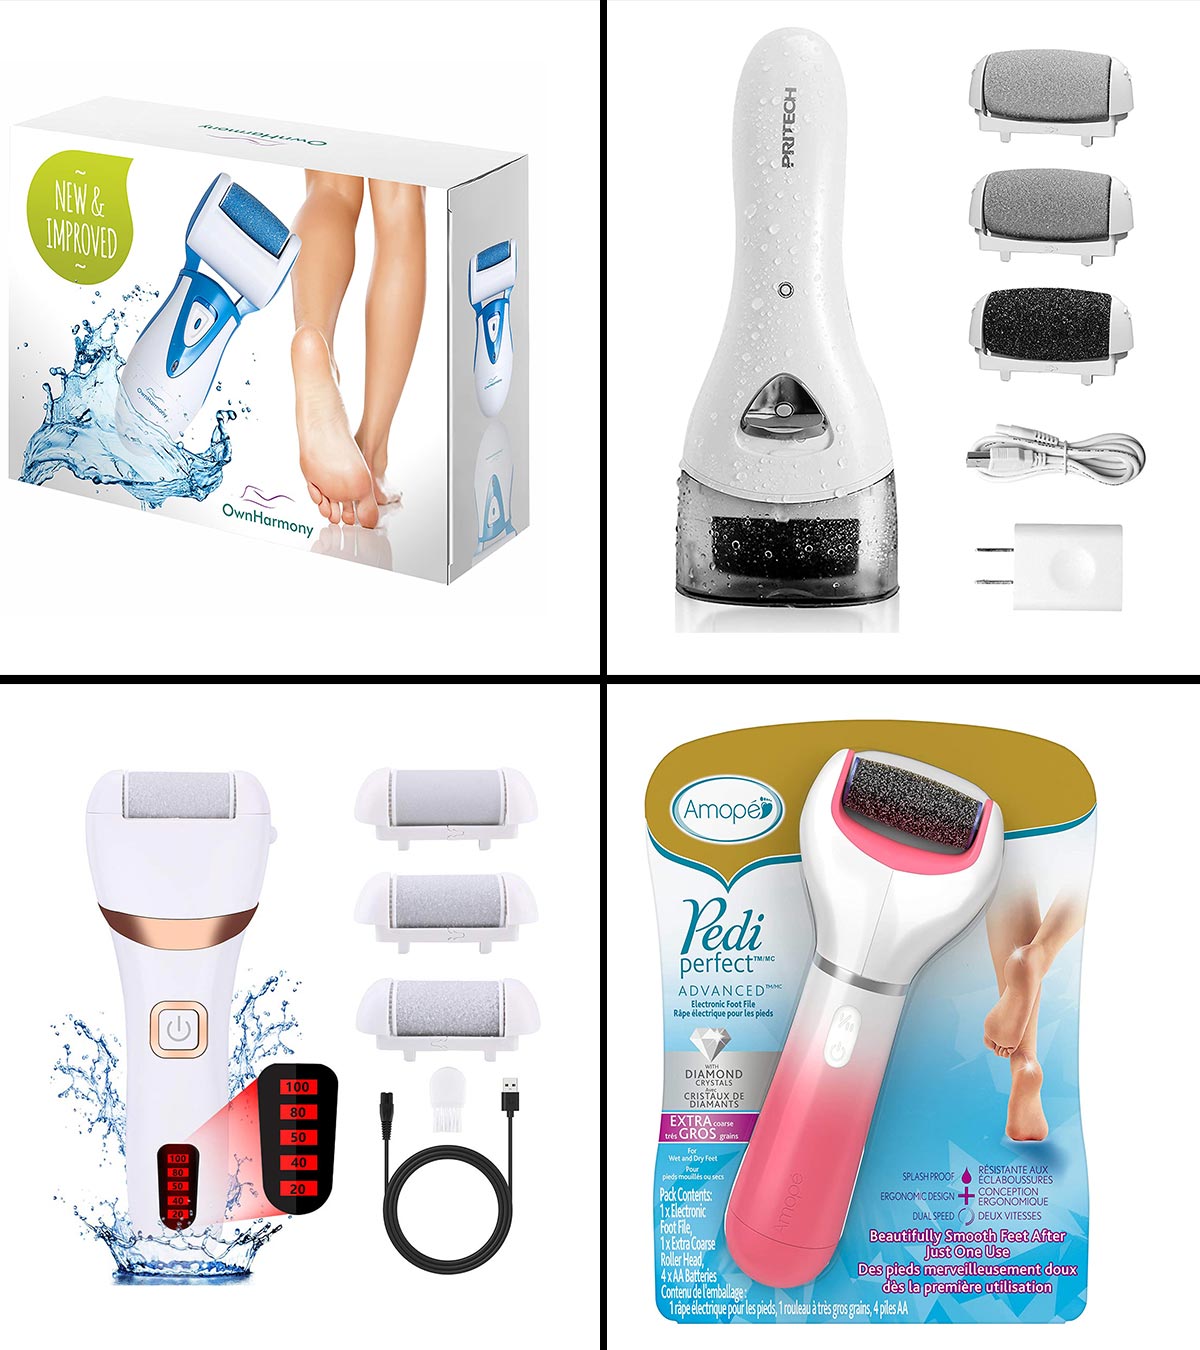 https://www.momjunction.com/wp-content/uploads/2021/07/11-Best-Electric-Callus-Removers-For-Soft-Feet-In-2021.jpg